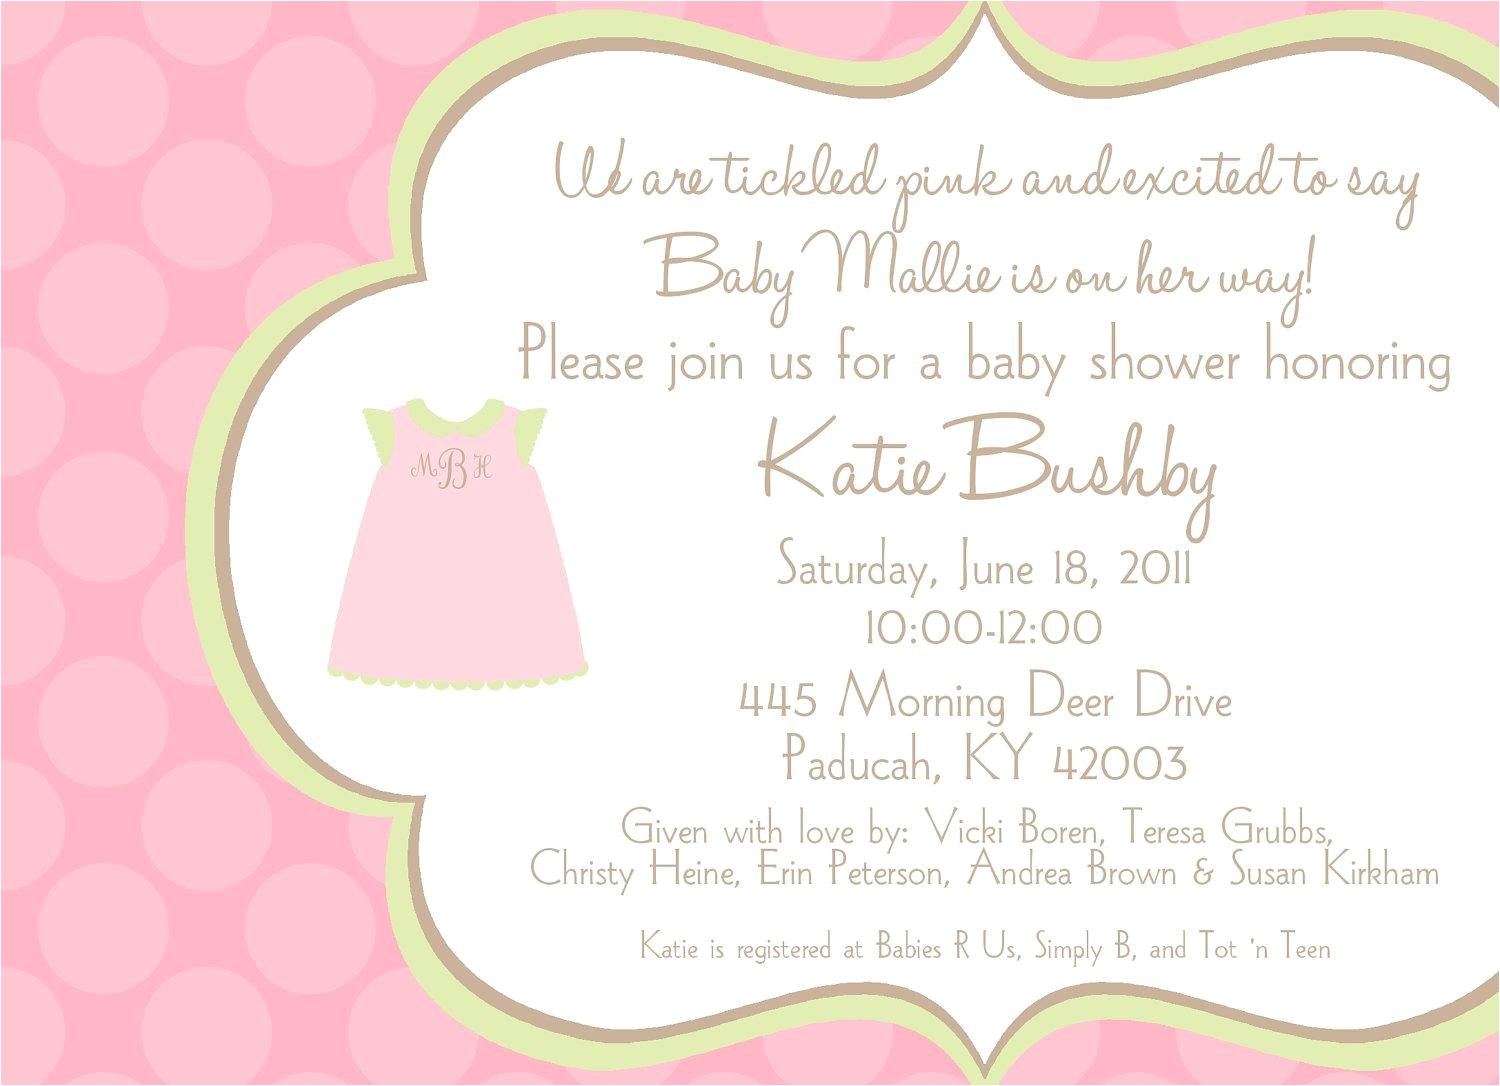 Baby Shower Invitation Text Template Baby Shower Invitation Wording Baby Shower Invitation